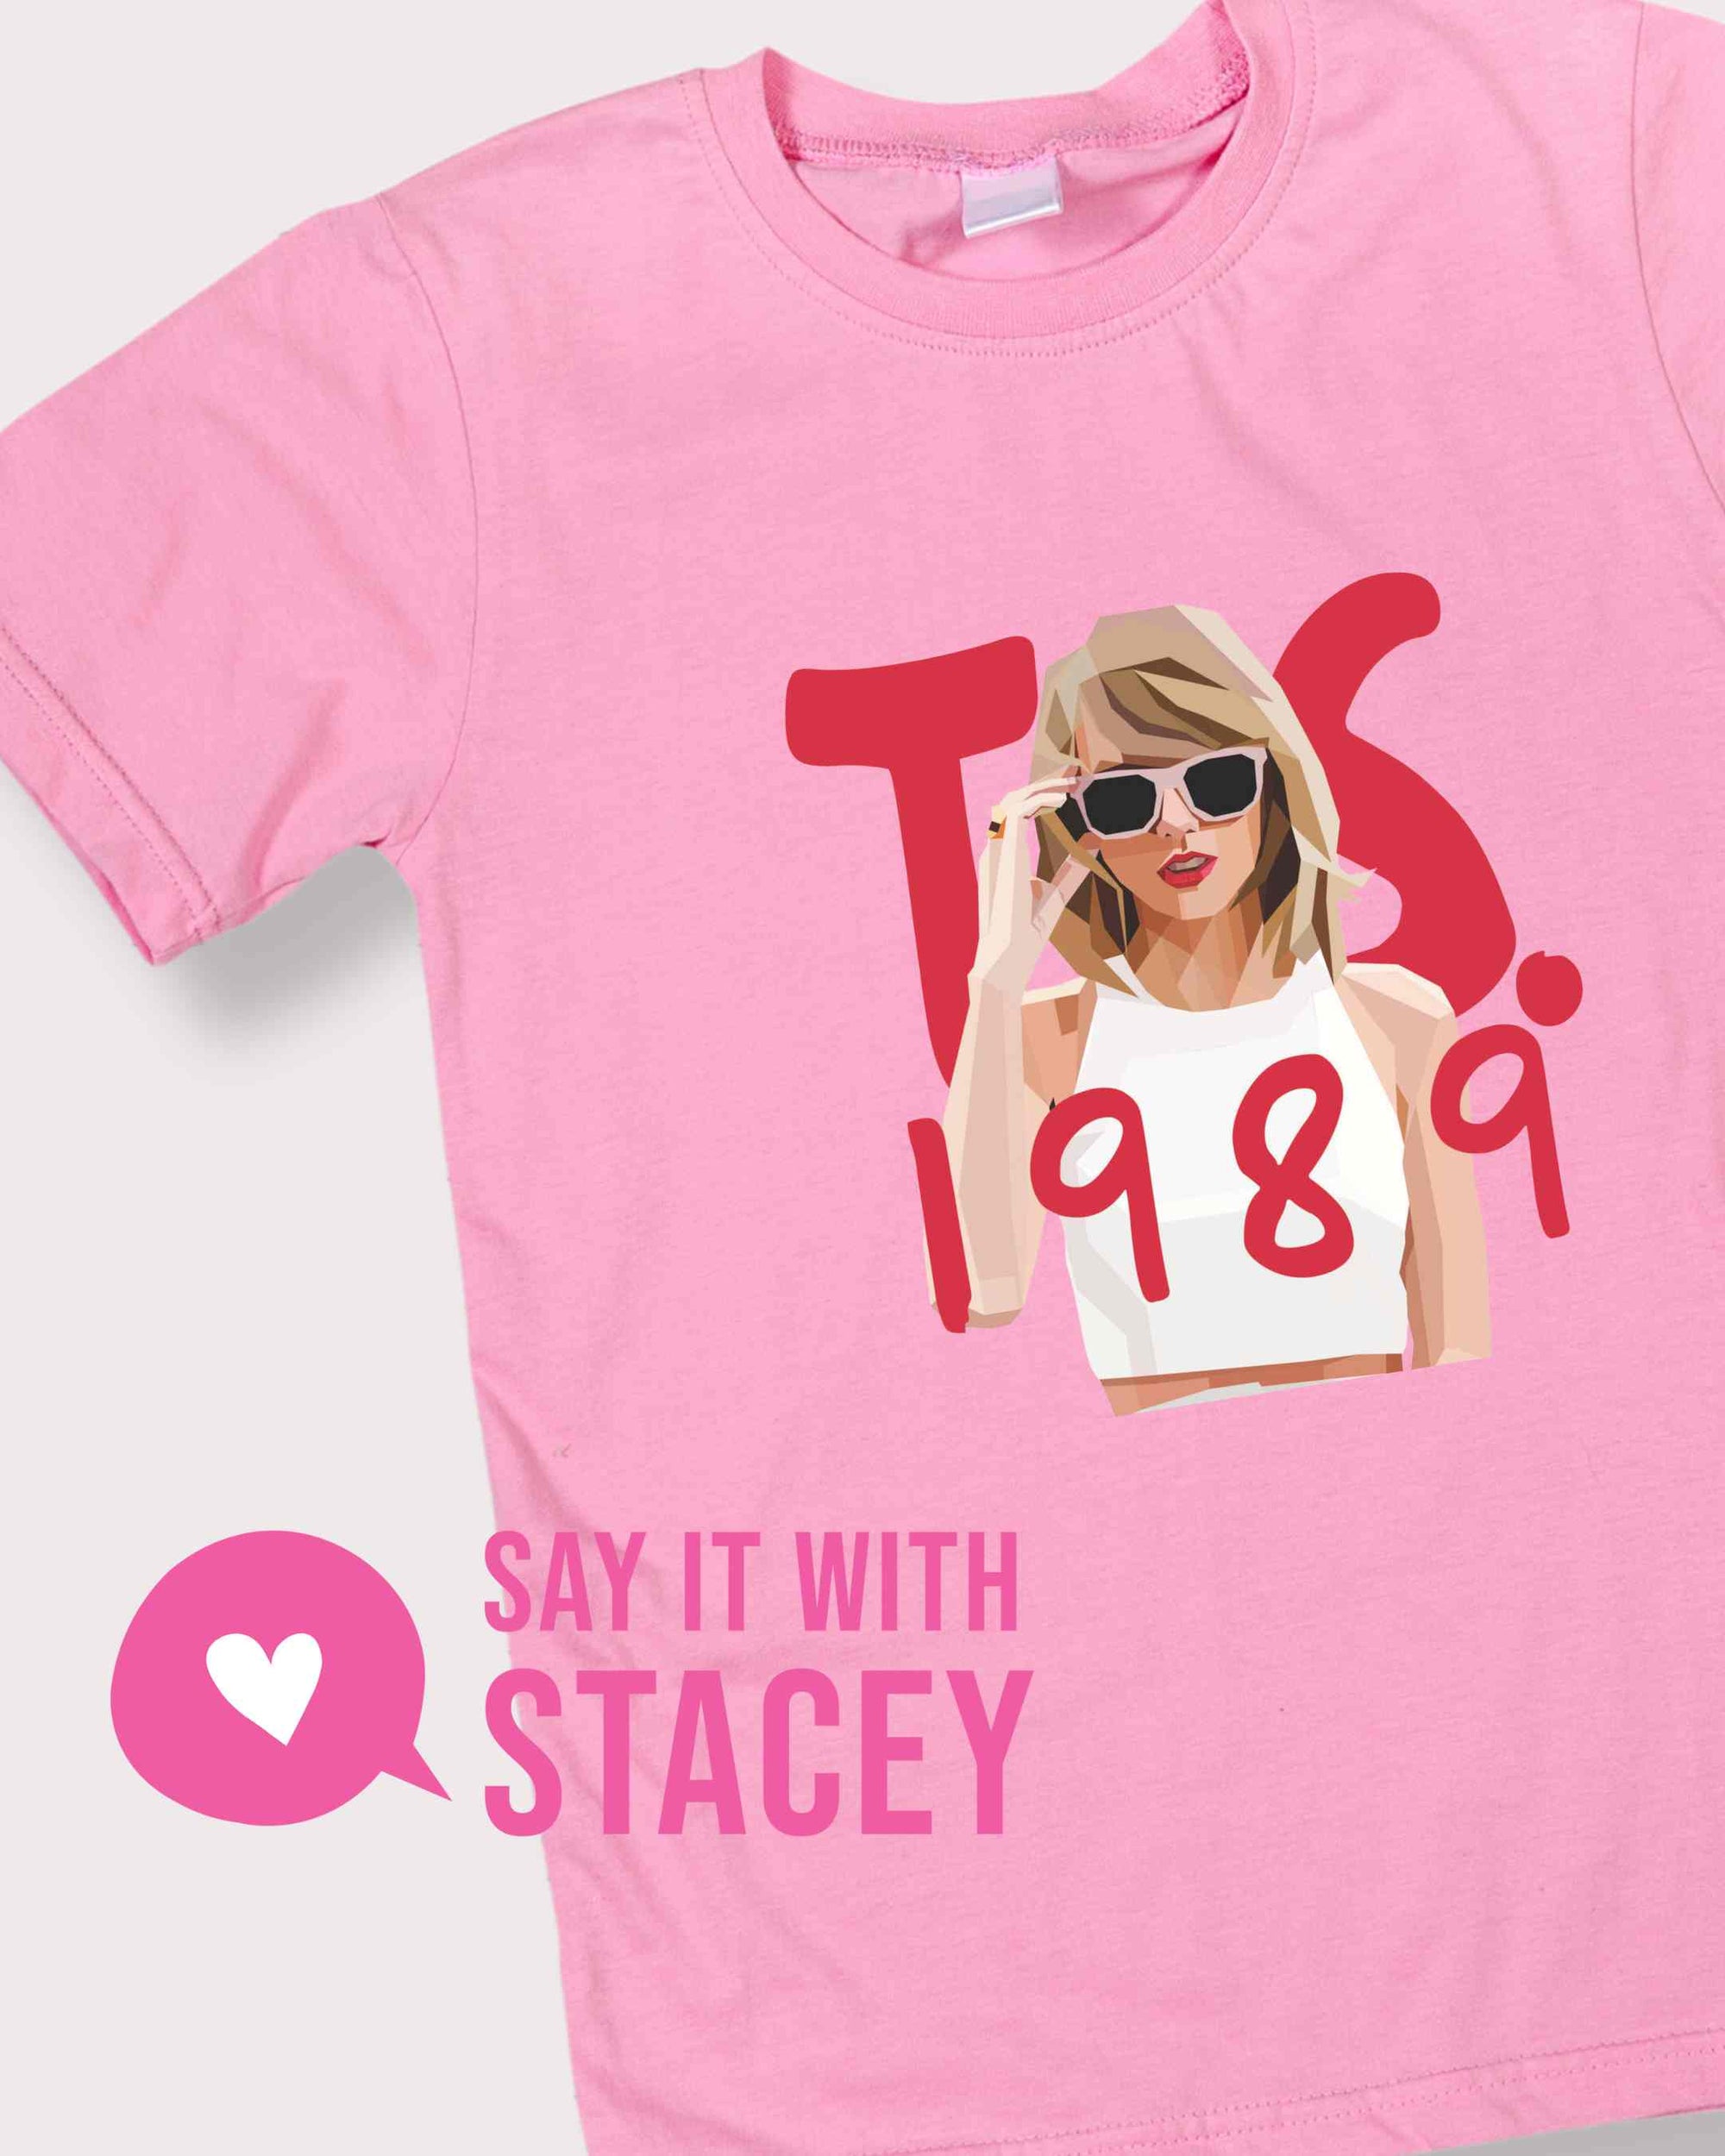 TAYLOR SWIFT Tee | Dark Pink Adult & Youth